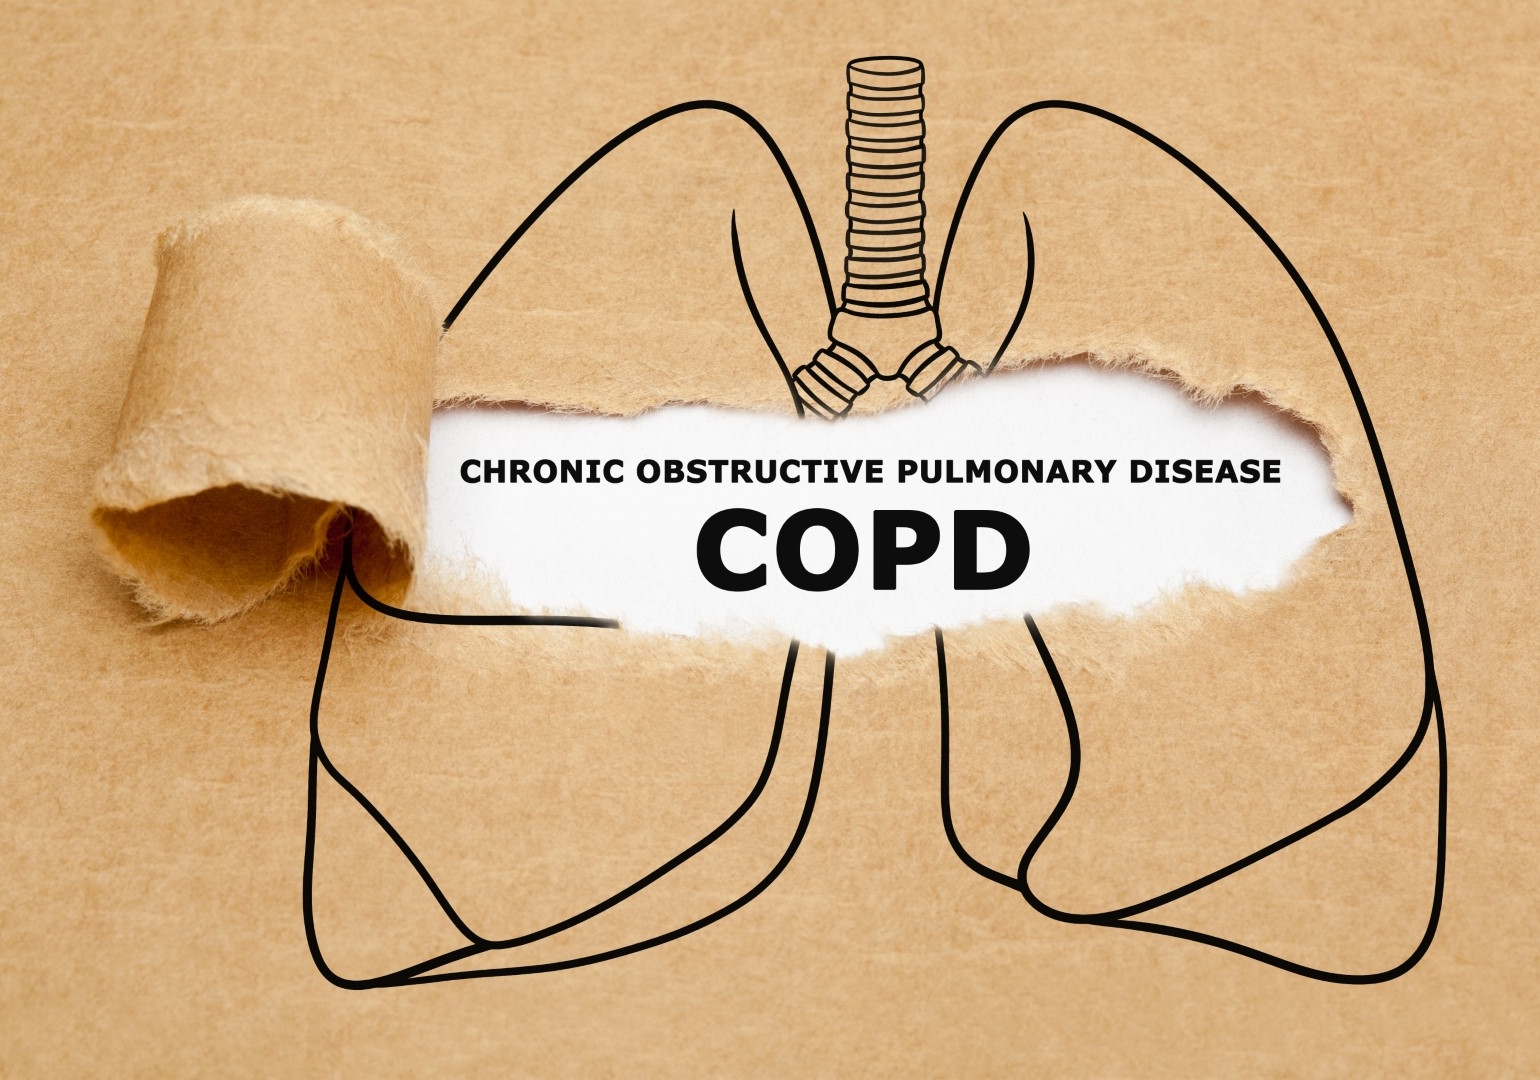 Image of a drawing of lungs being ripped open to show COPD